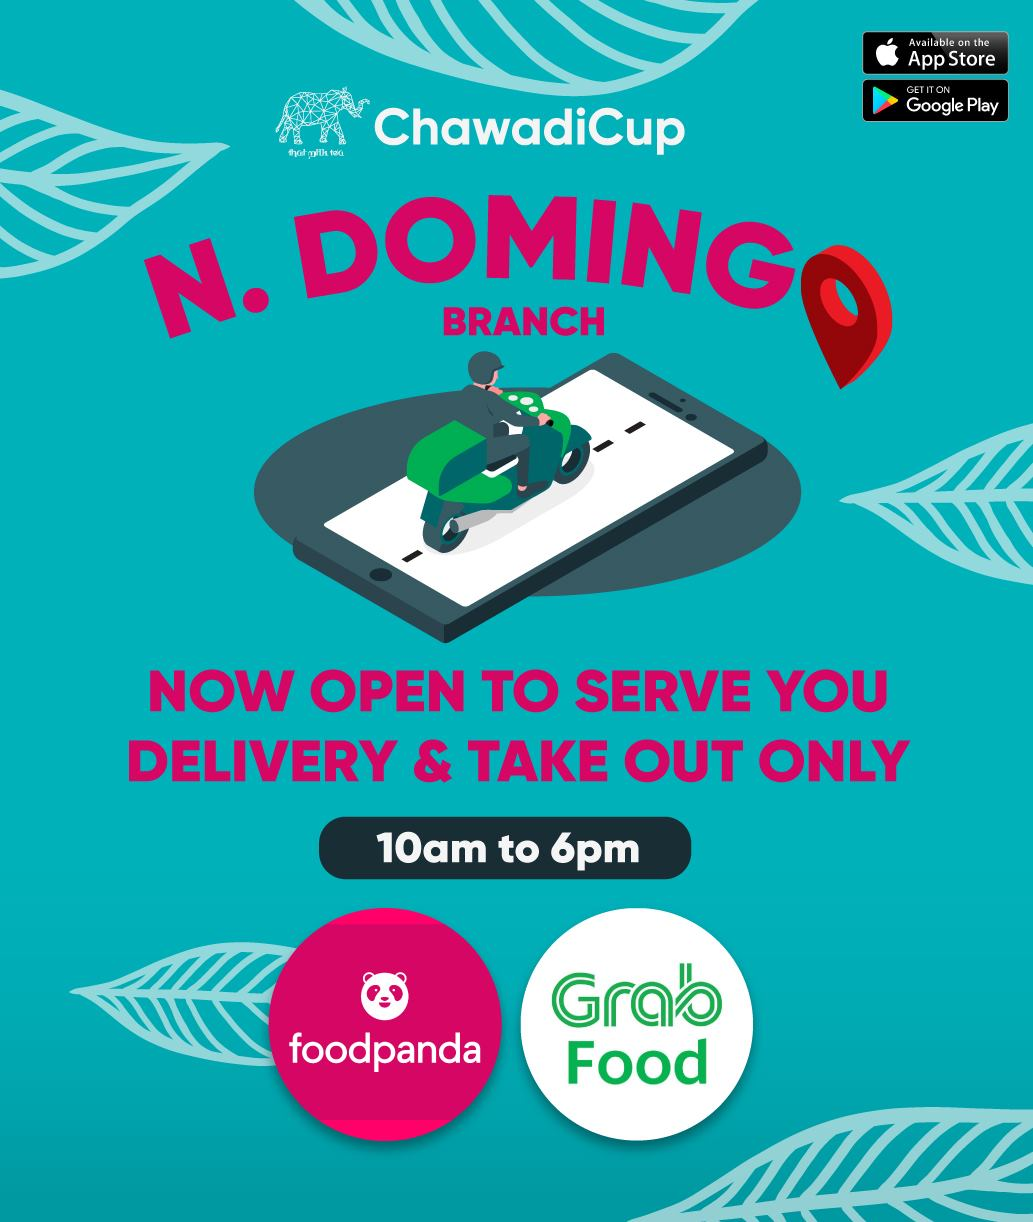 ChawdiCup's delivery and take-out announcement